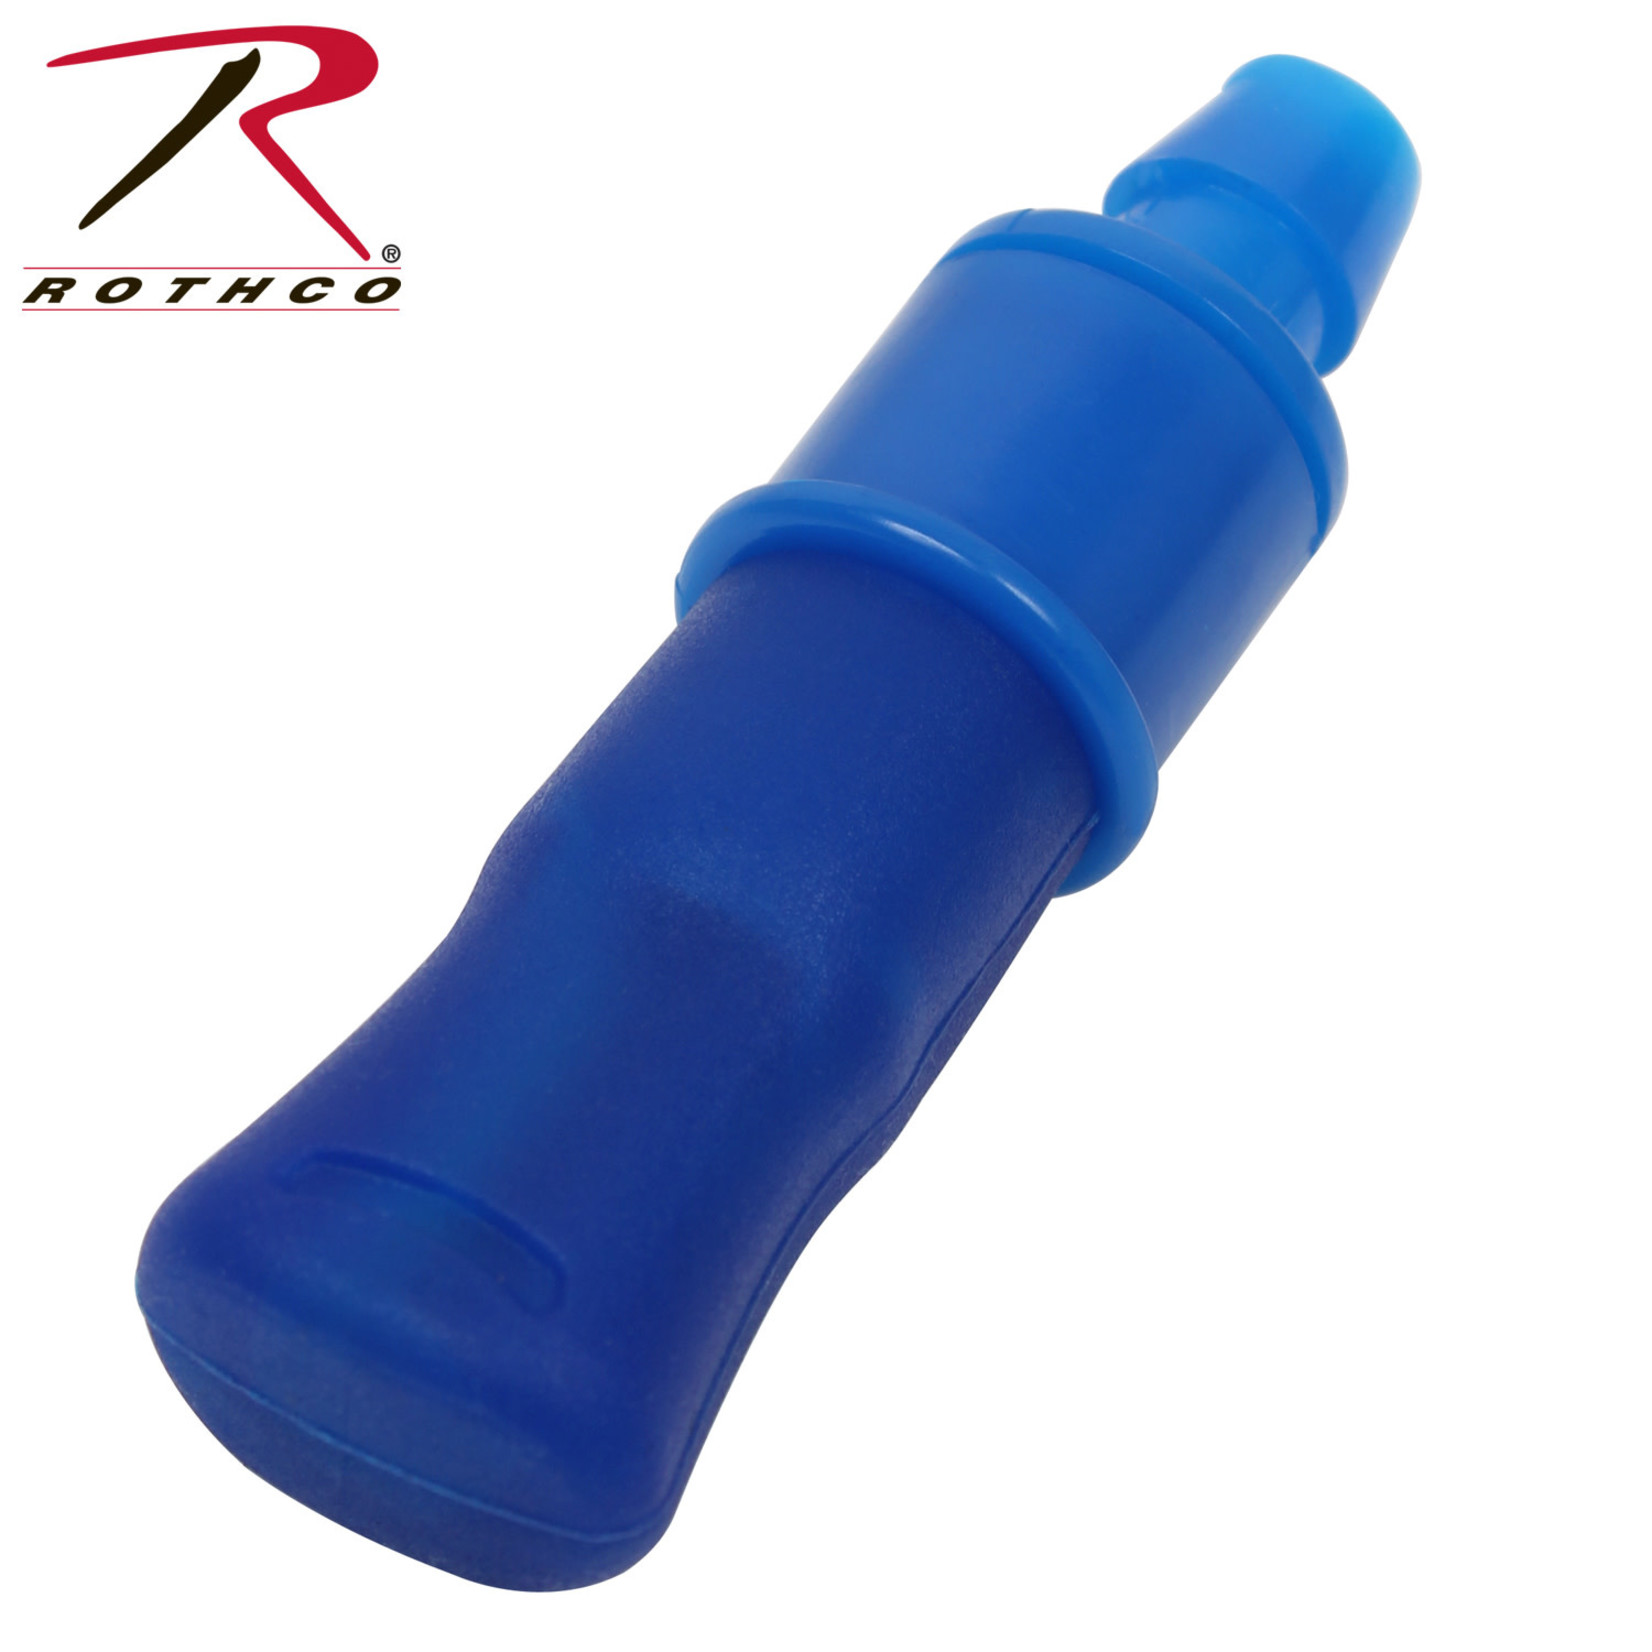 Rothco Rothco Hydration Systems Bite Valve Replacement